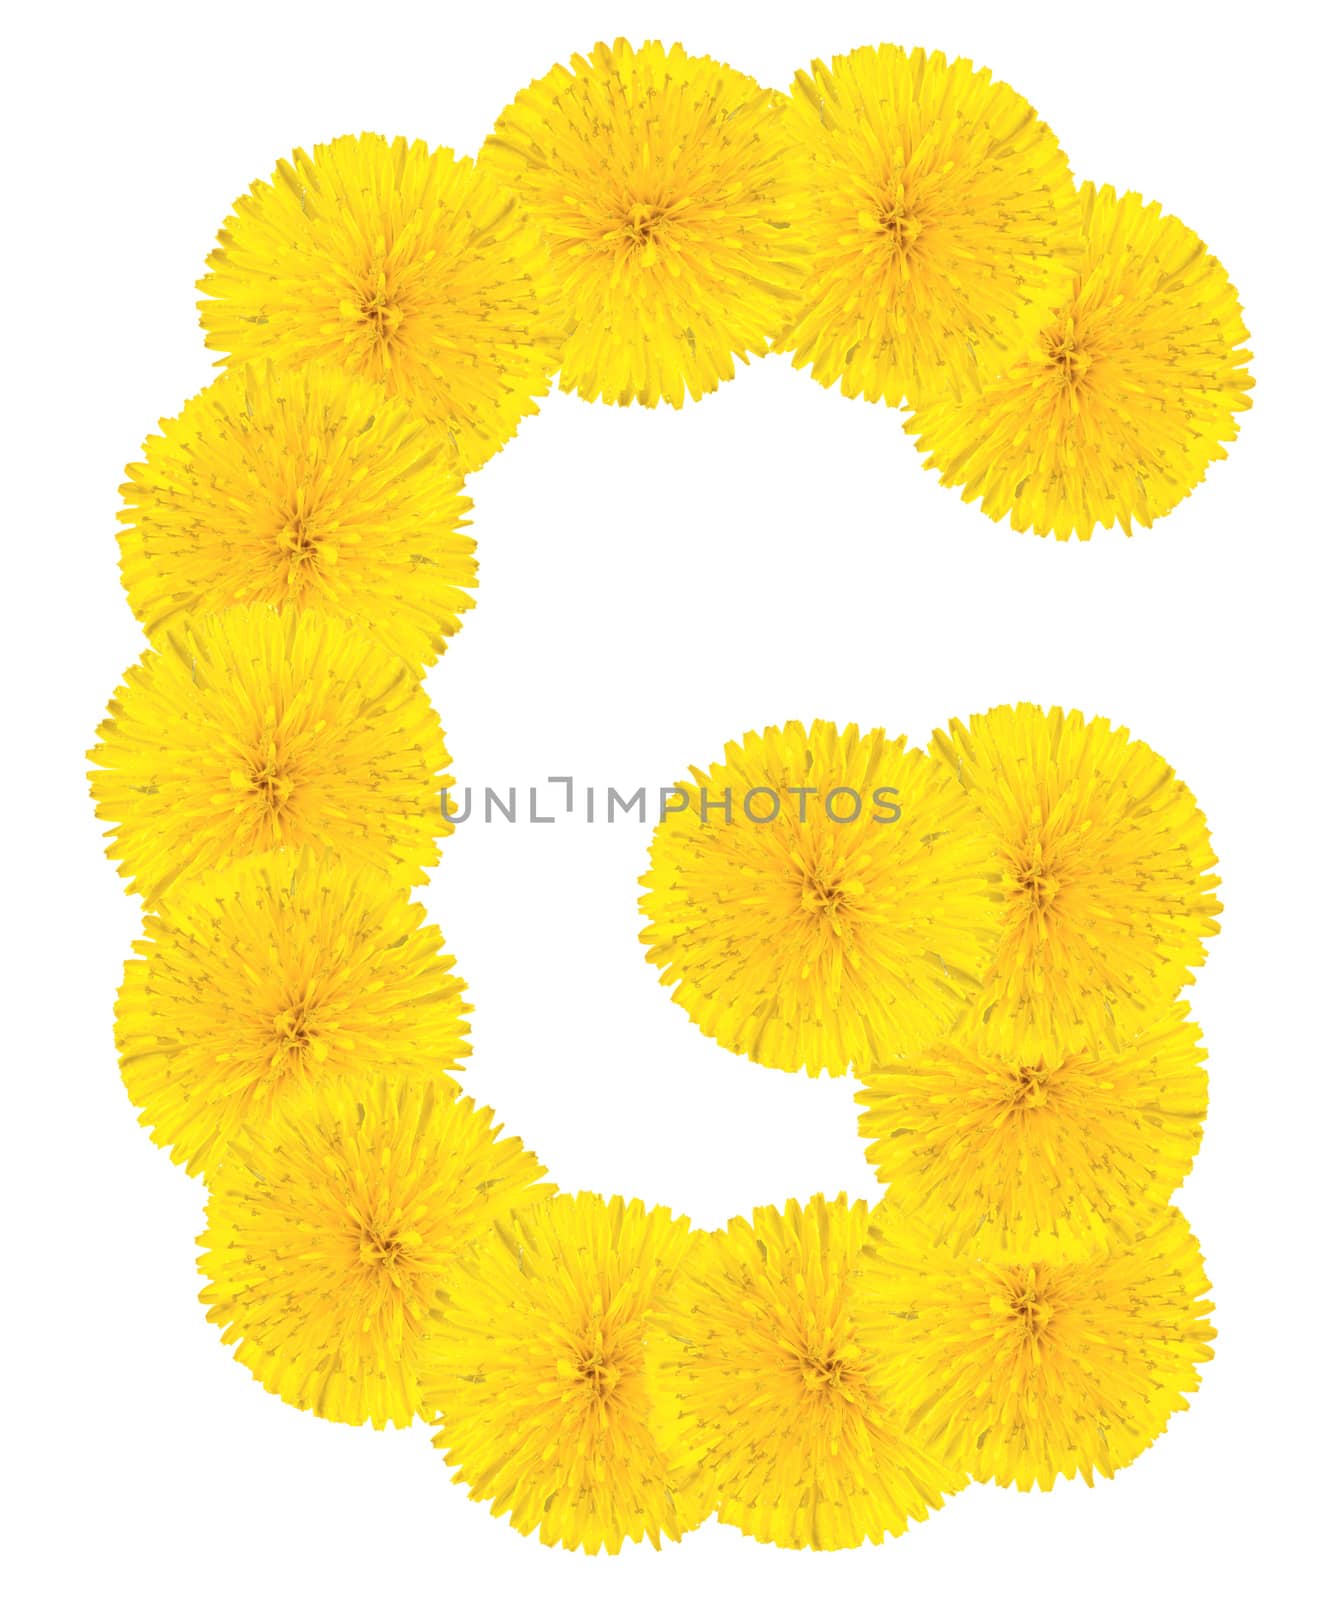 Letter G made from dandelions by Valengilda